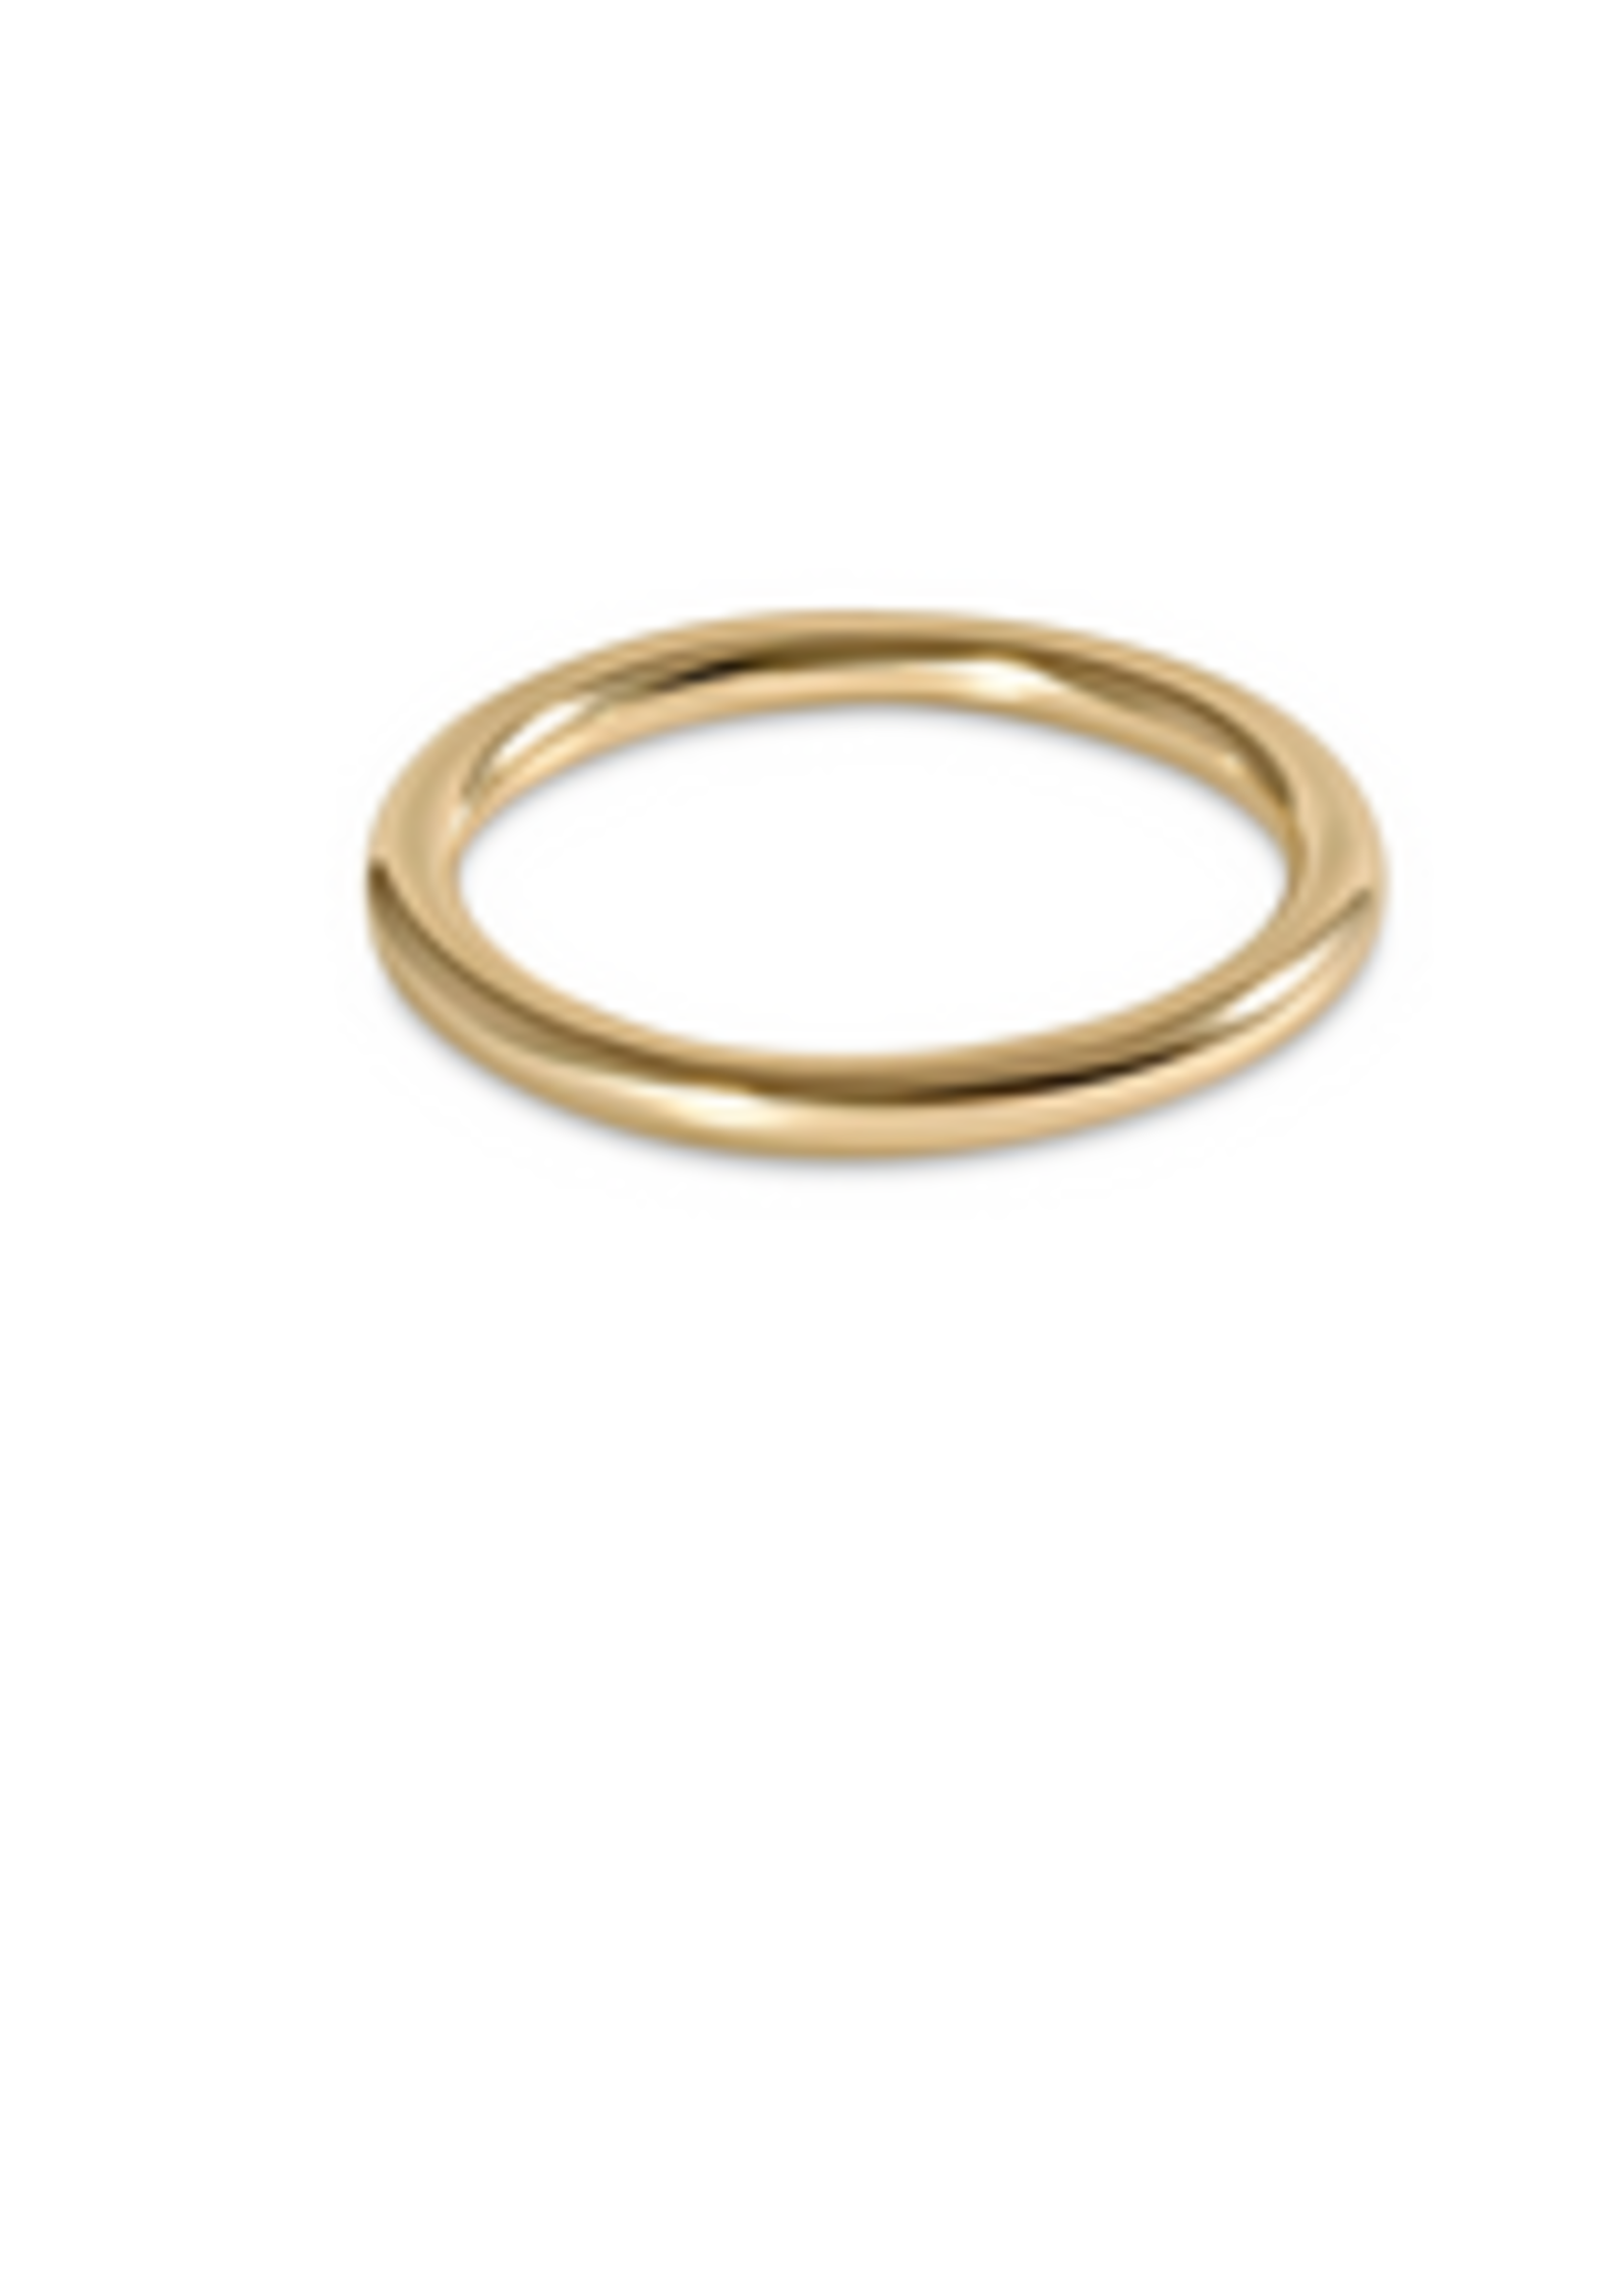 CLASSIC GOLD BAND RING